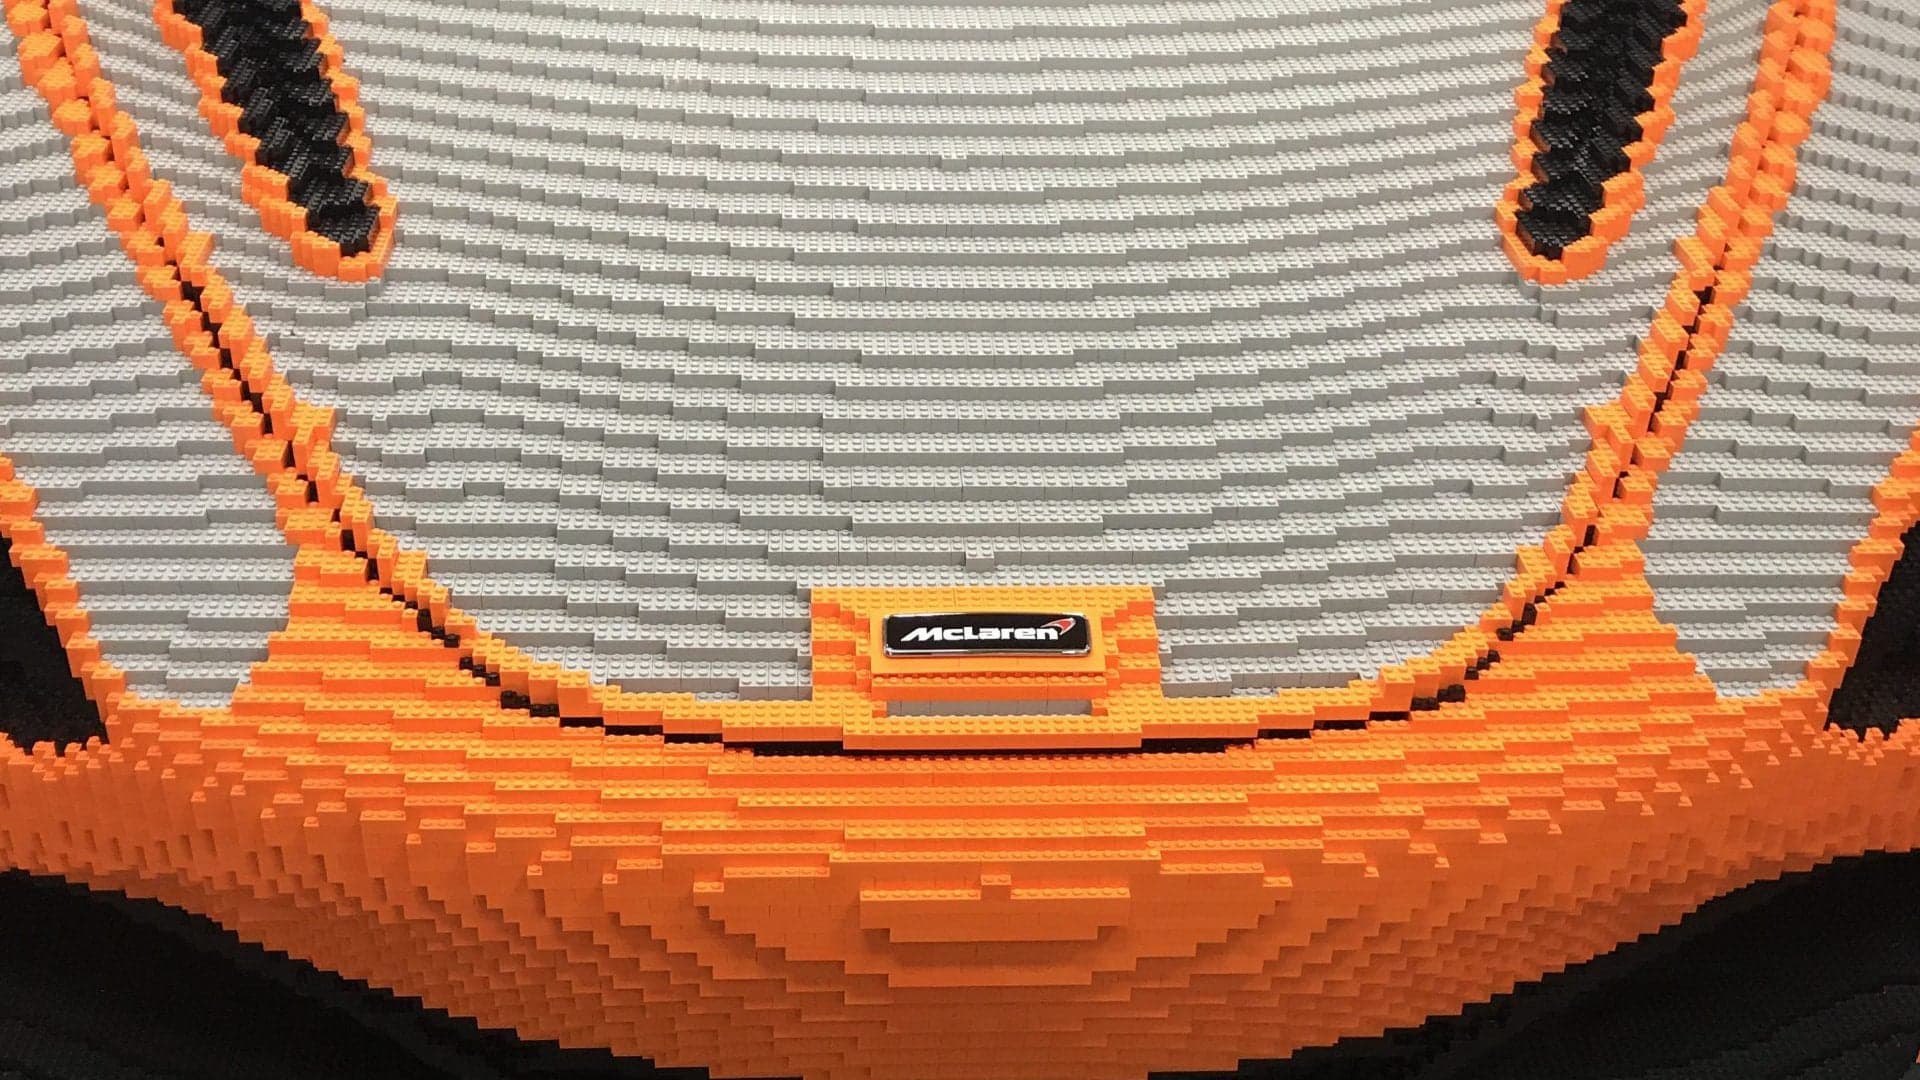 McLaren Is Live-Building a Lego 720S Supercar at the Goodwood Festival of Speed